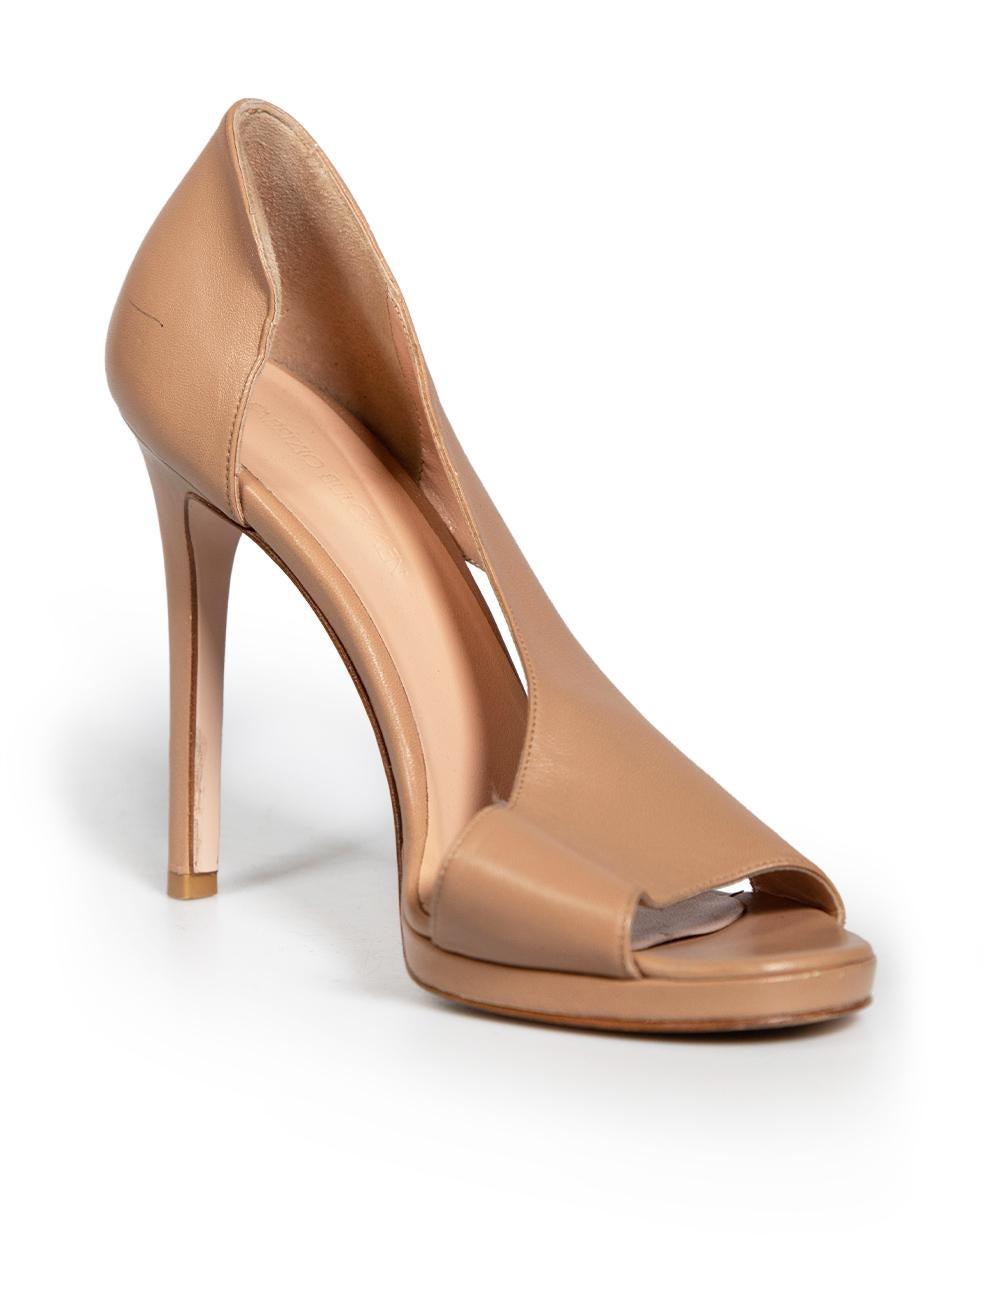 CONDITION is Very good. Minimal wear to heels is evident. Minimal wear to soles, with abrasions to the heel post and back heel seam on this used Fabrizio Bulckaen designer resale item.
 
 
 
 Details
 
 
 Beige
 
 Leather
 
 Heels
 
 Open toe
 
